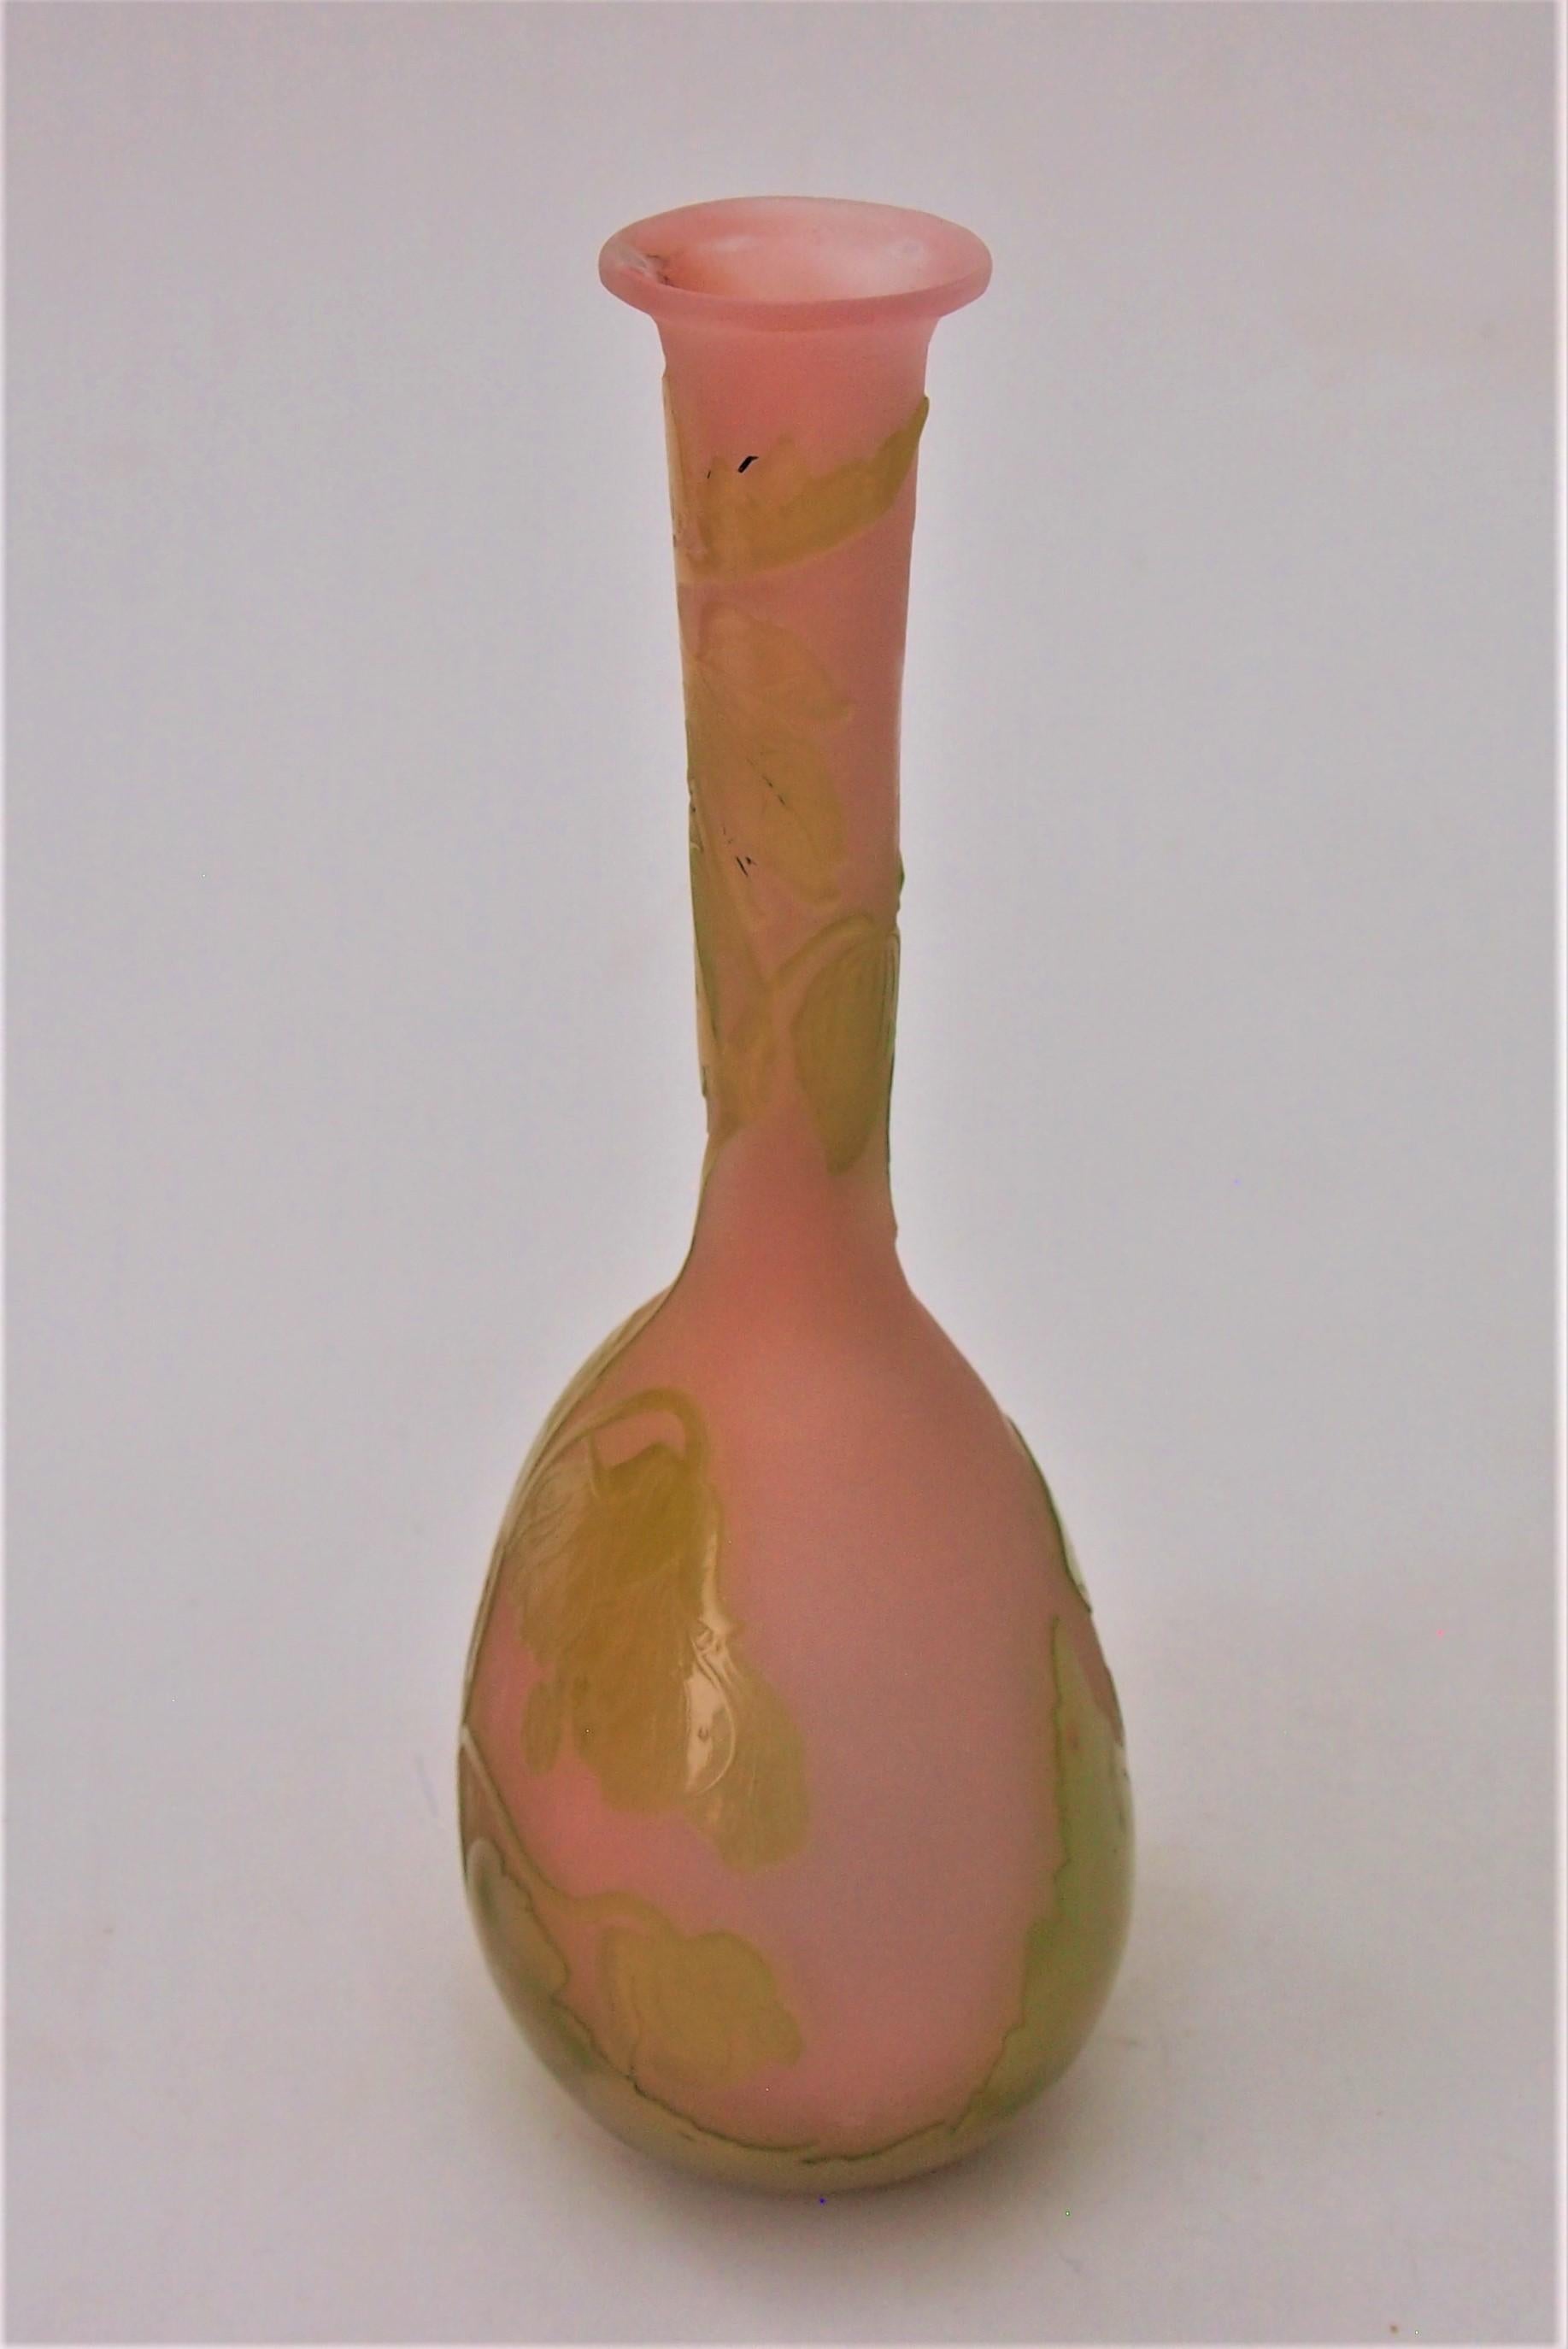 Classic Art Nouveau Emile Galle 'Banjo' vase, depicting blooms in fire polished green over pink, signed in cameo (see picture 3) -Provost Mark I -see chart -last picture. Emile Galle Cameo Banjo vases (so called because they vaguely resemble that